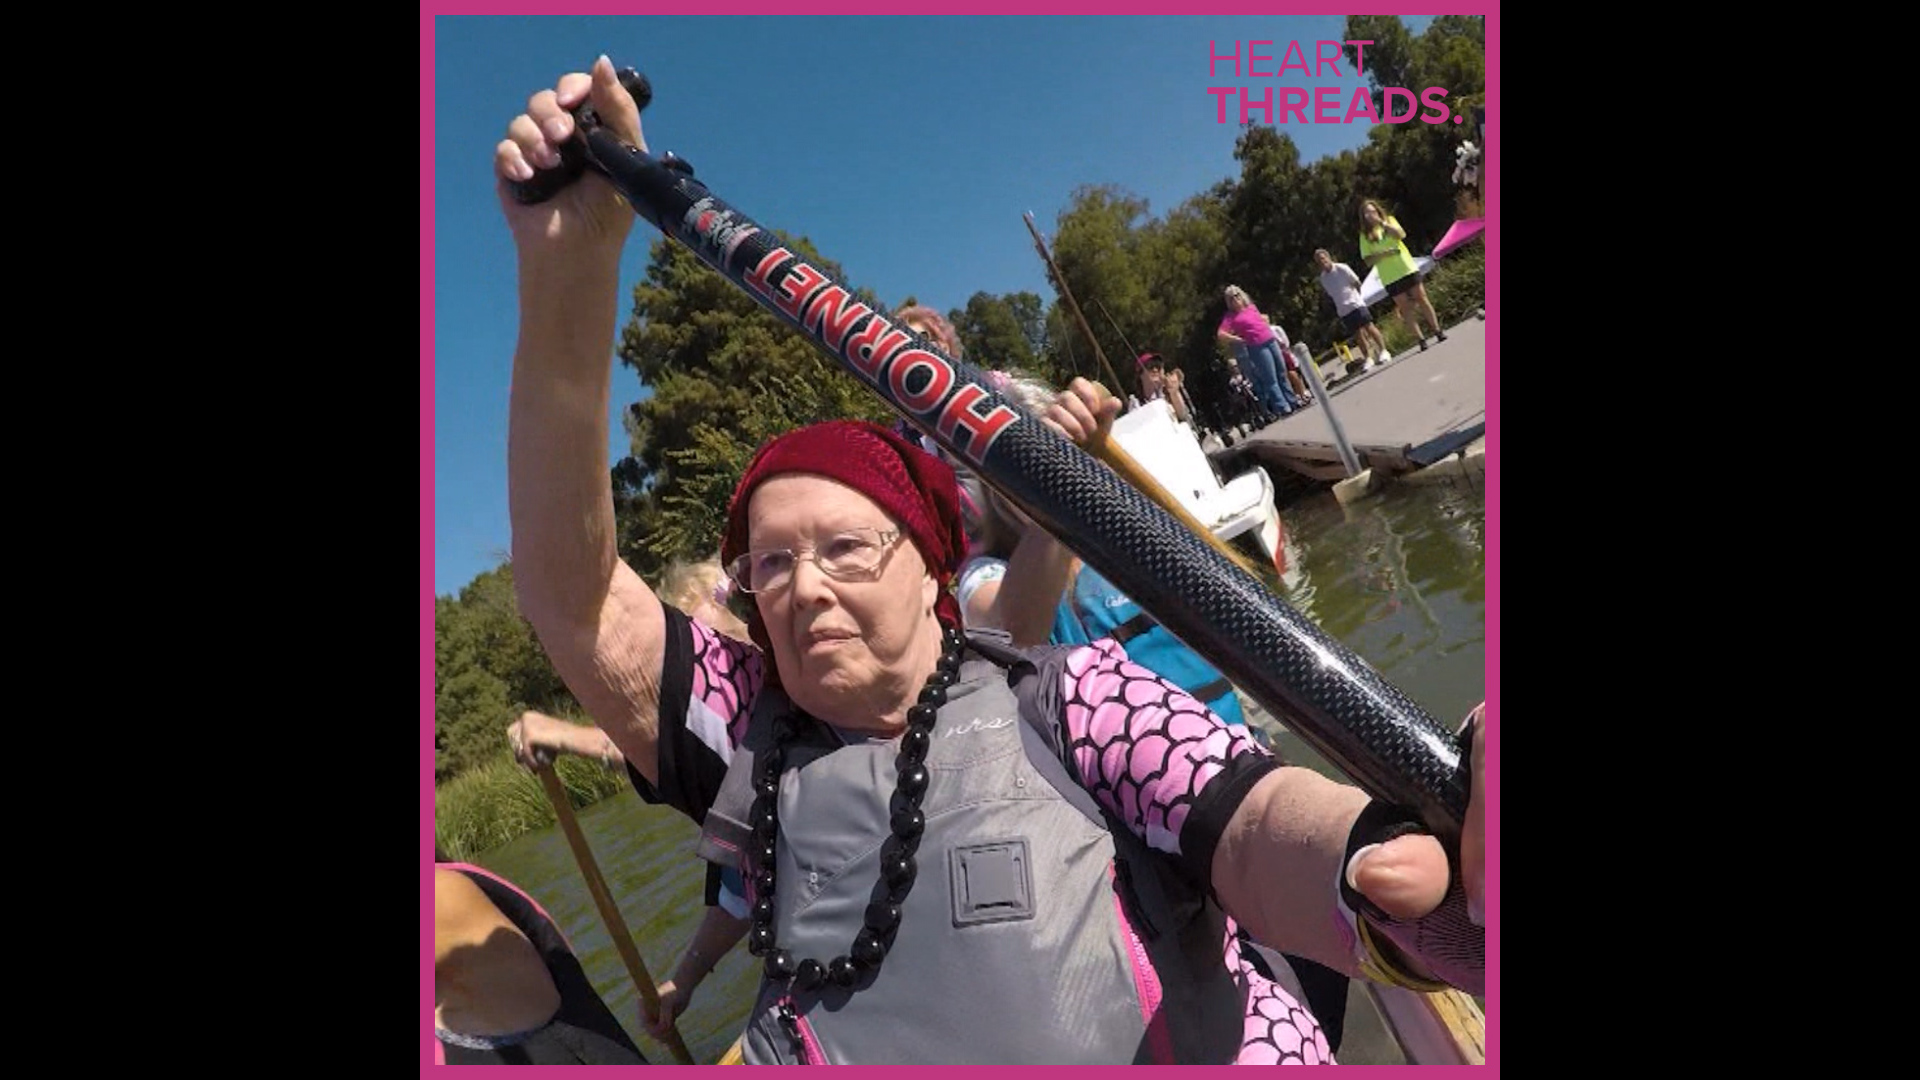 Sandra's stage 4 breast cancer has kept her from her love of dragon boat racing. So her teammates arranged a big surprise for her.